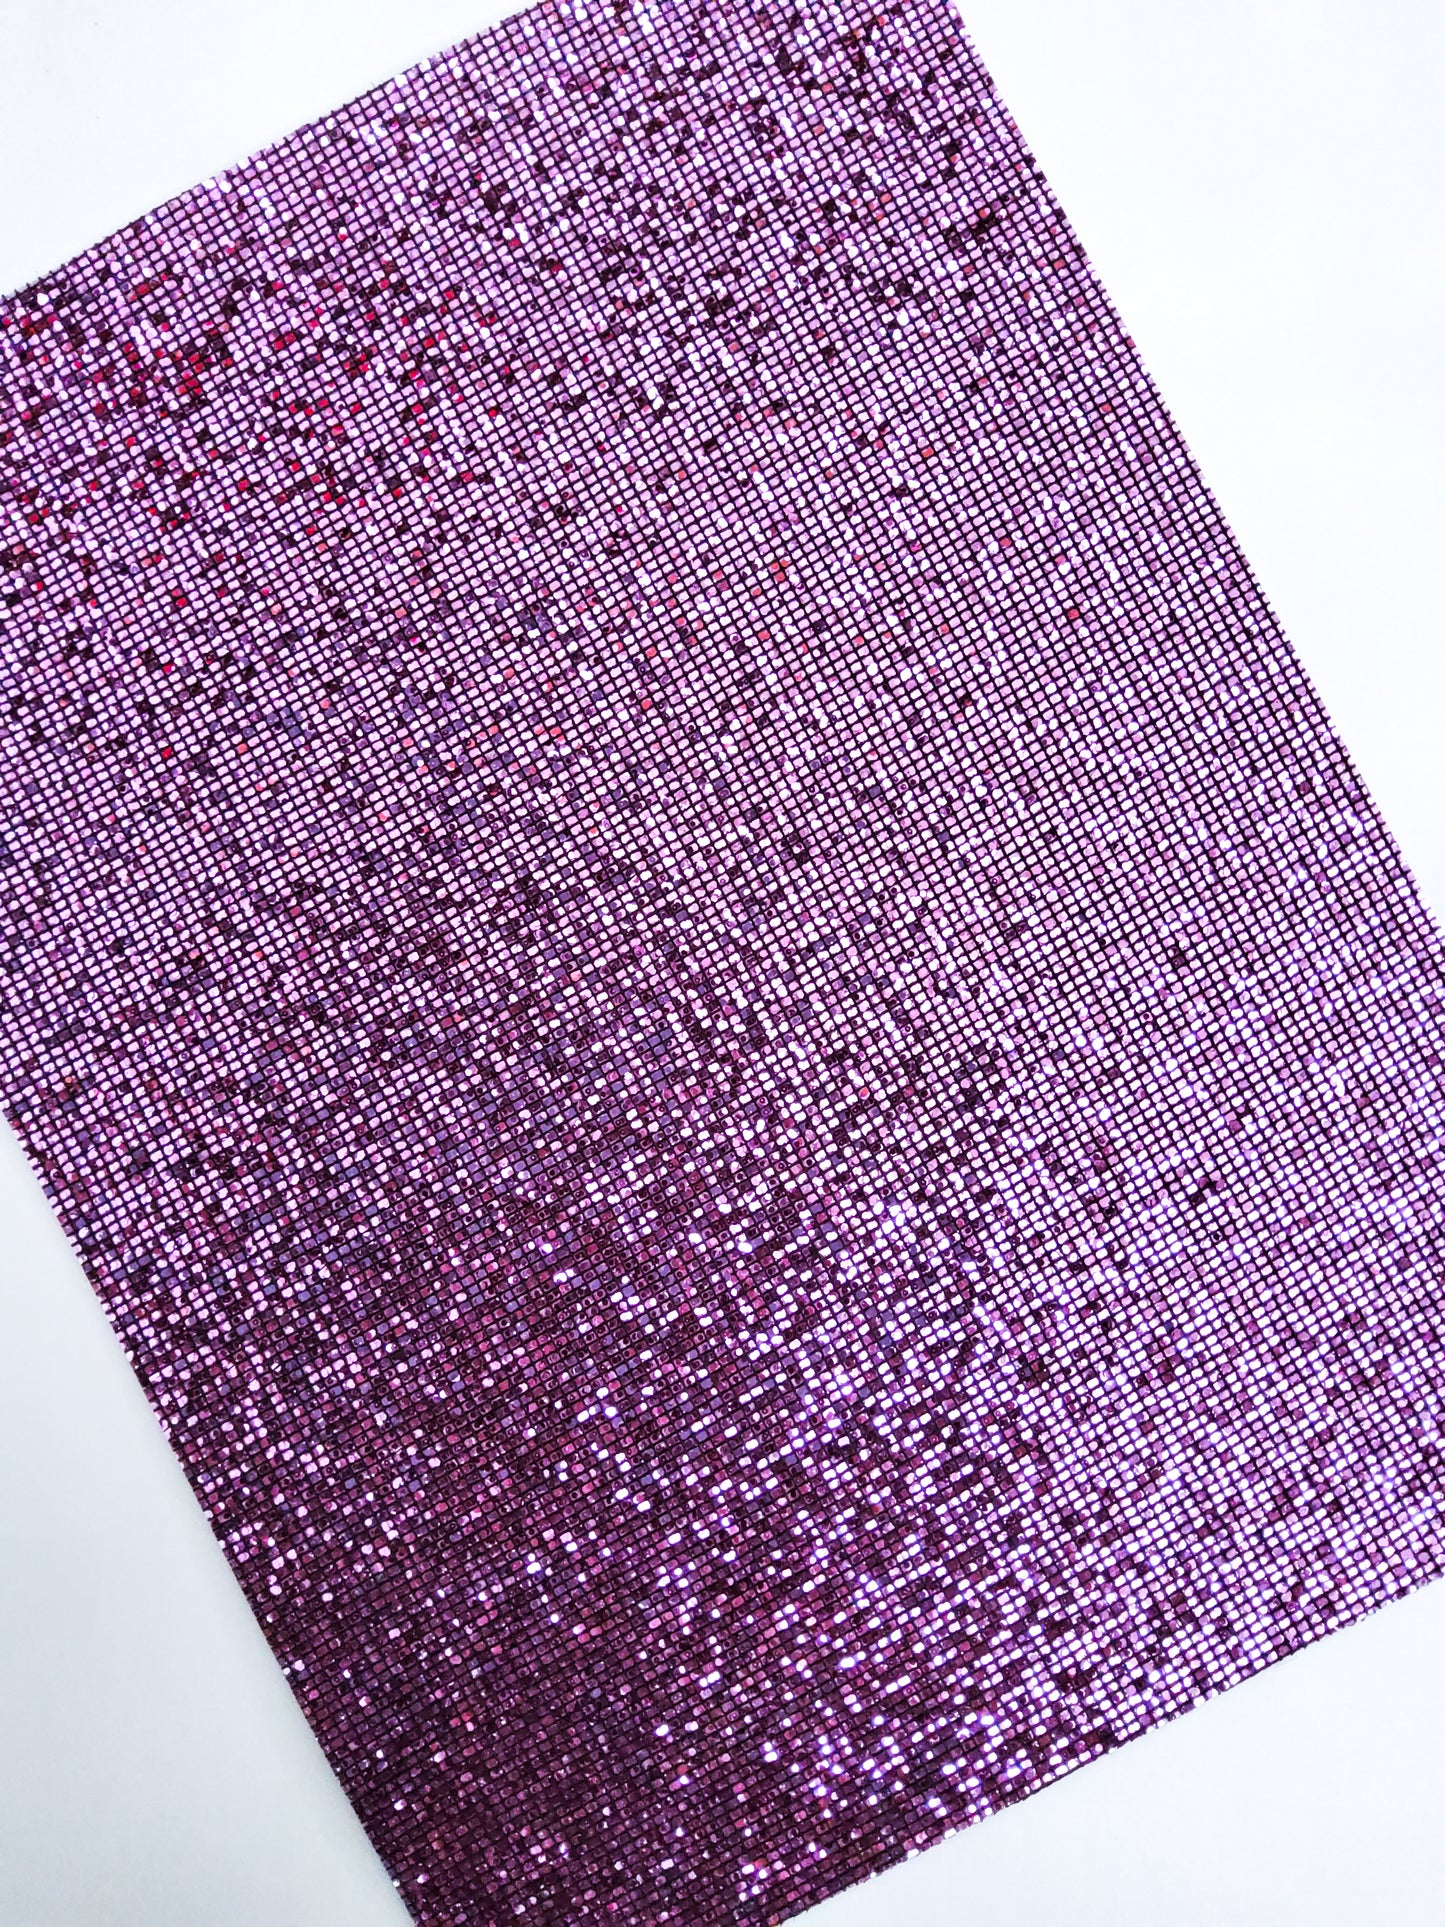 Square Purple Pink Glitter 9x12 faux leather sheet